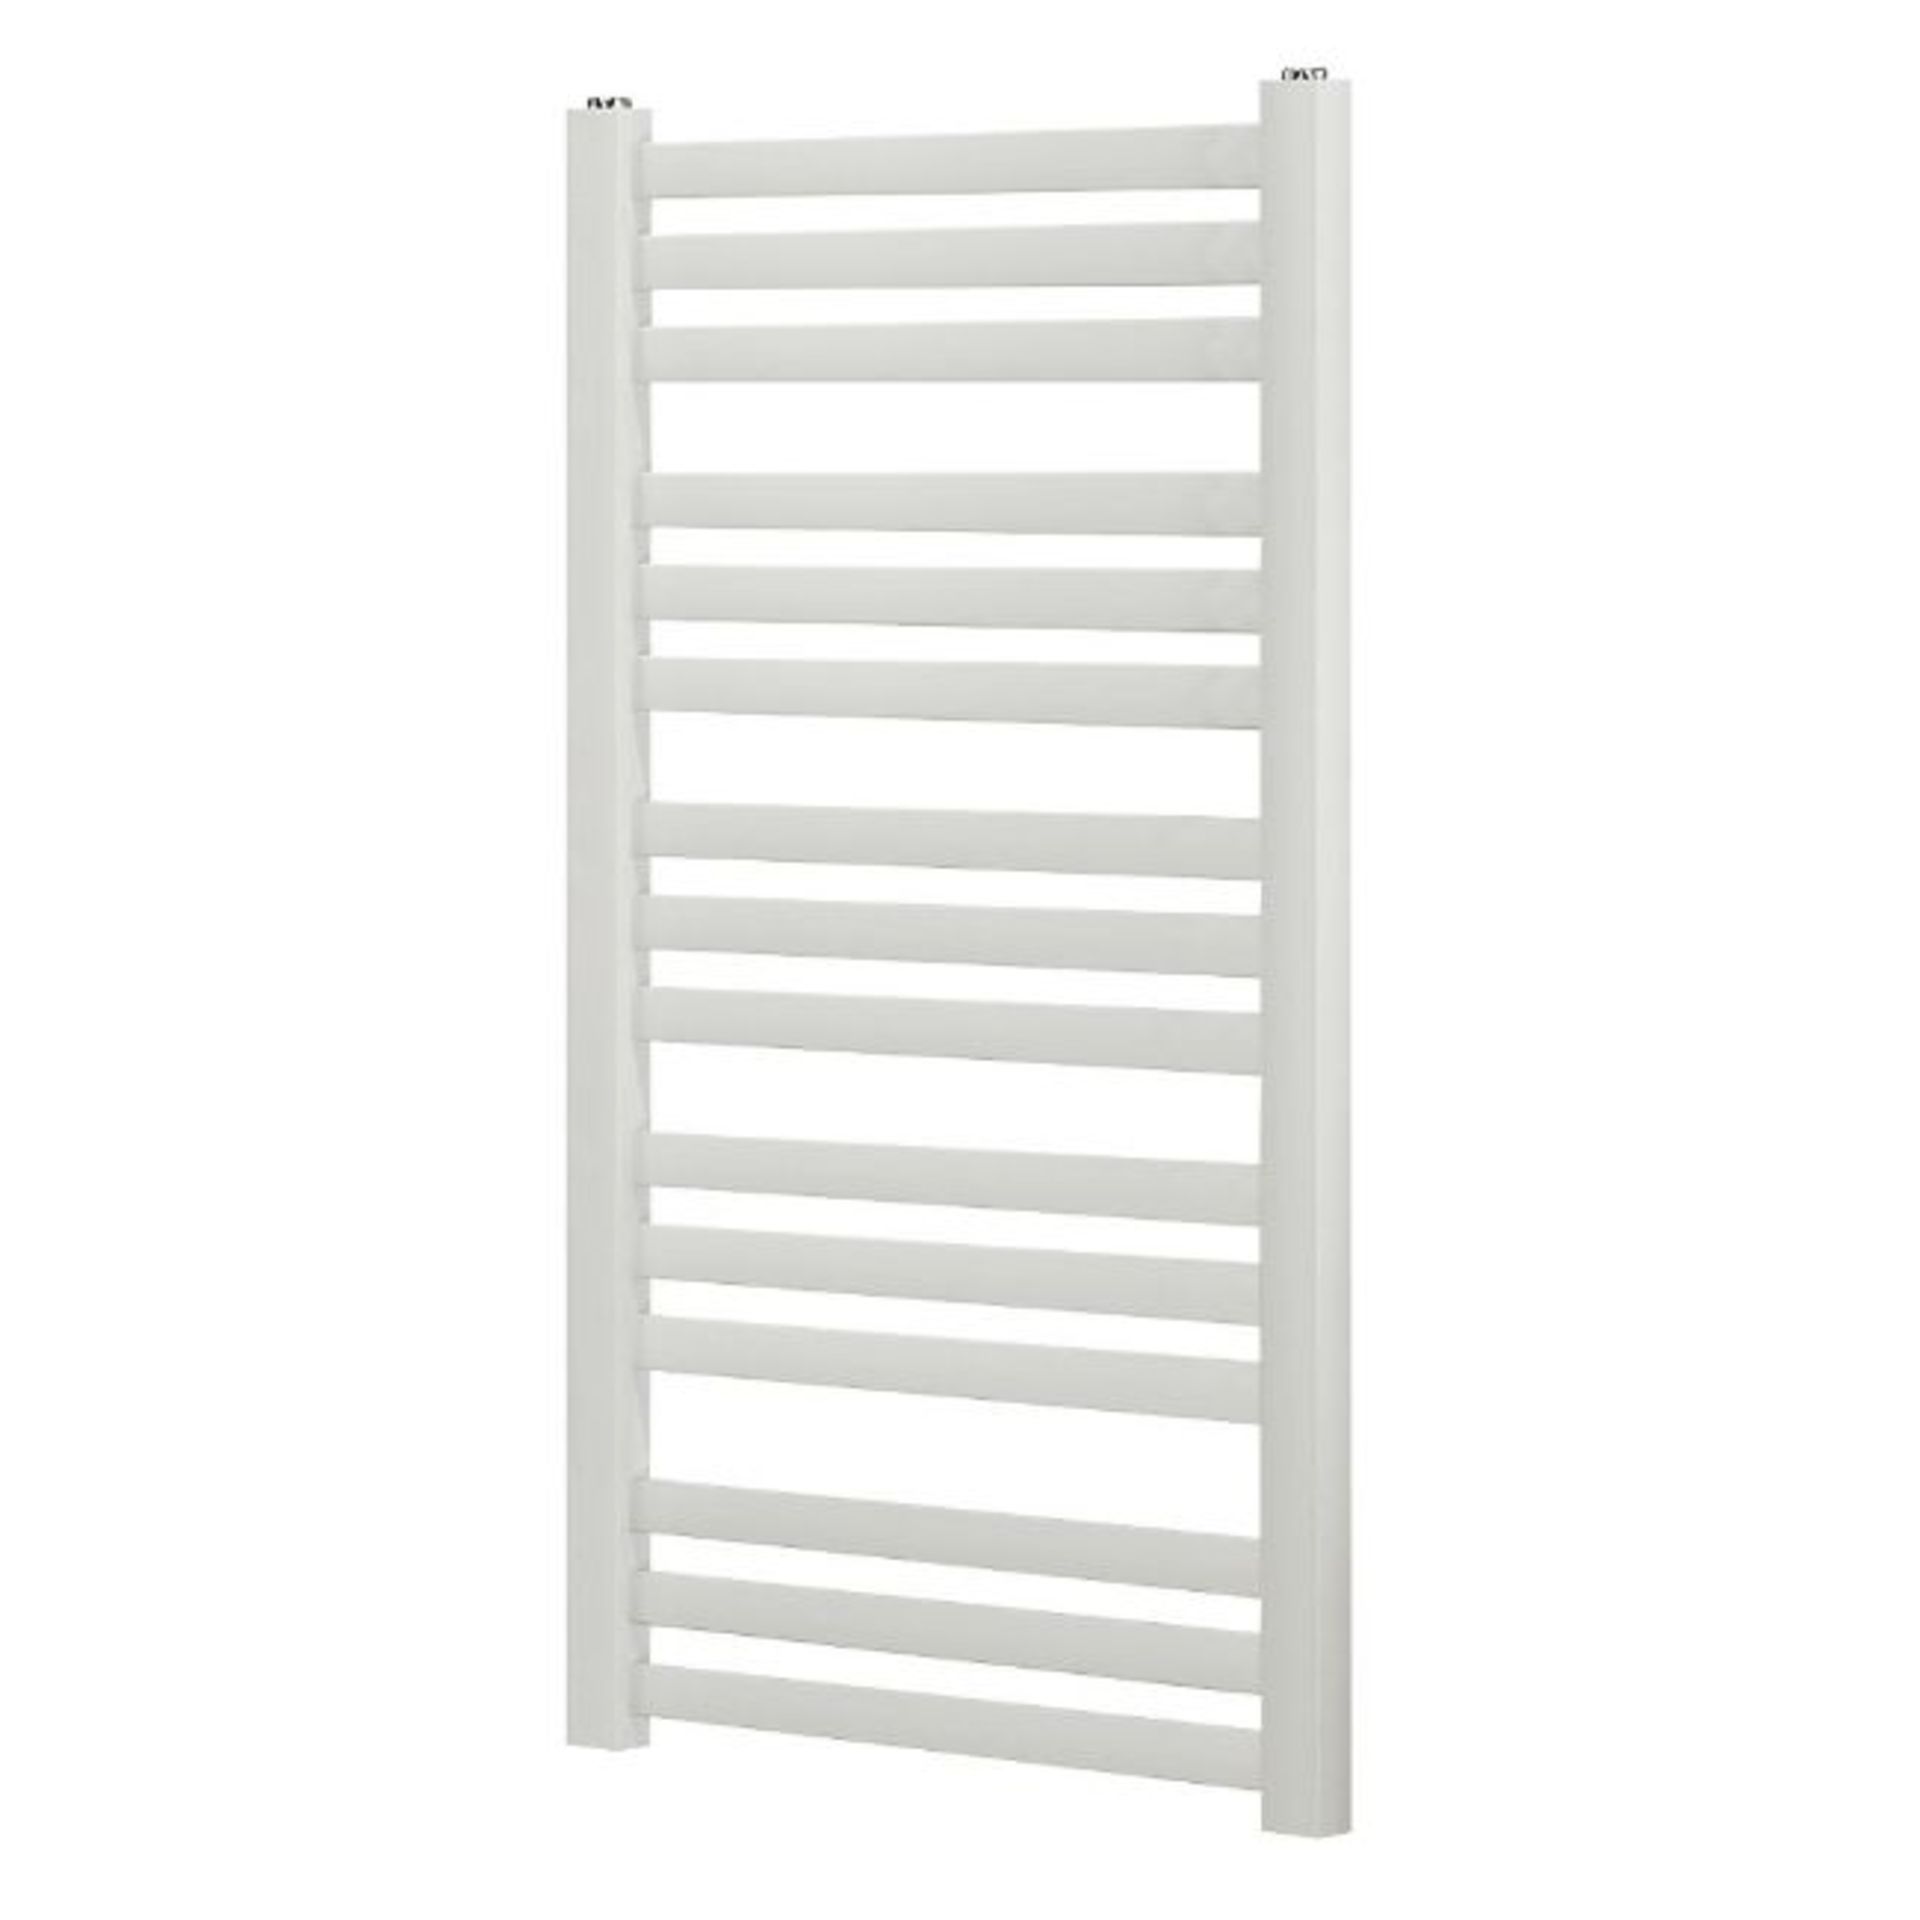 New (H33) 900x450mm Towel Radiator 900 x 500mm White. High Quality Powder-Coated Steel Con... - Image 3 of 3